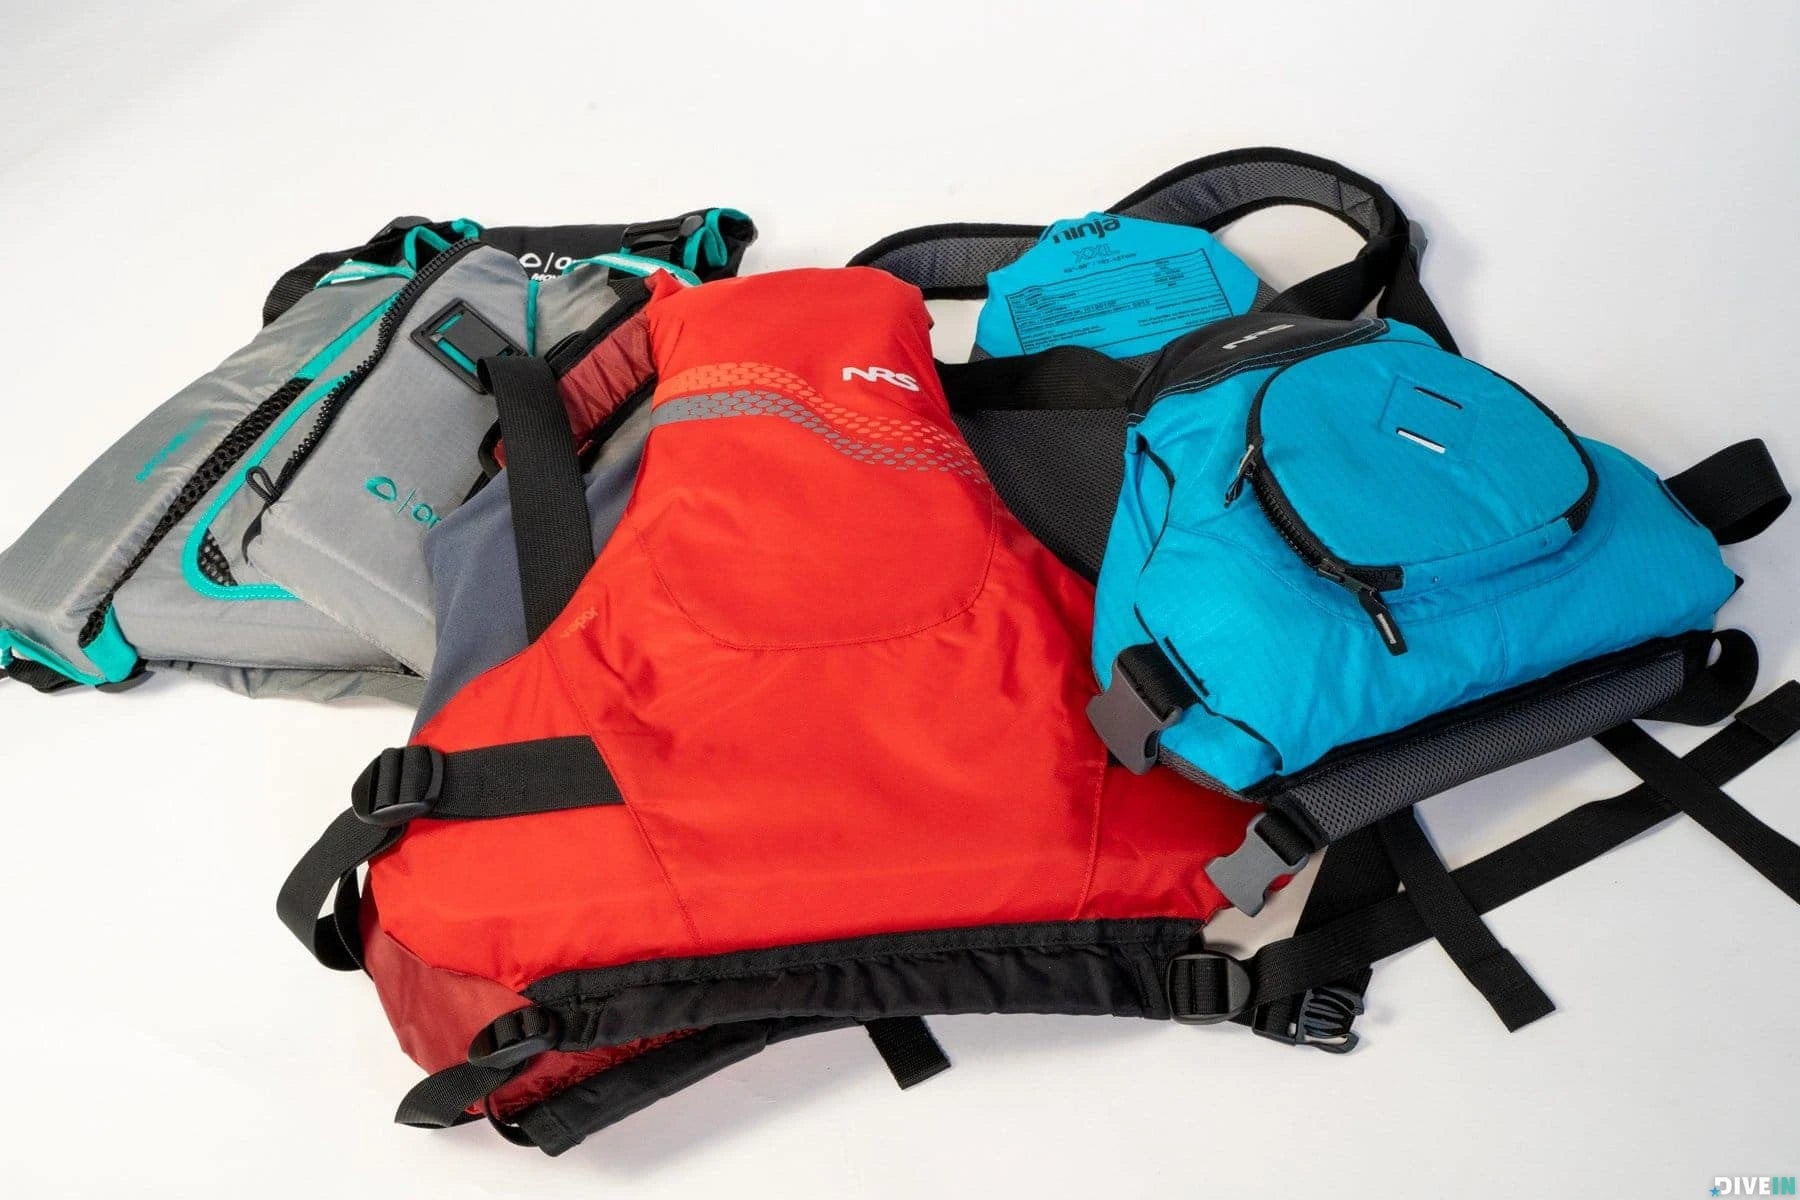 How to Choose a PFD